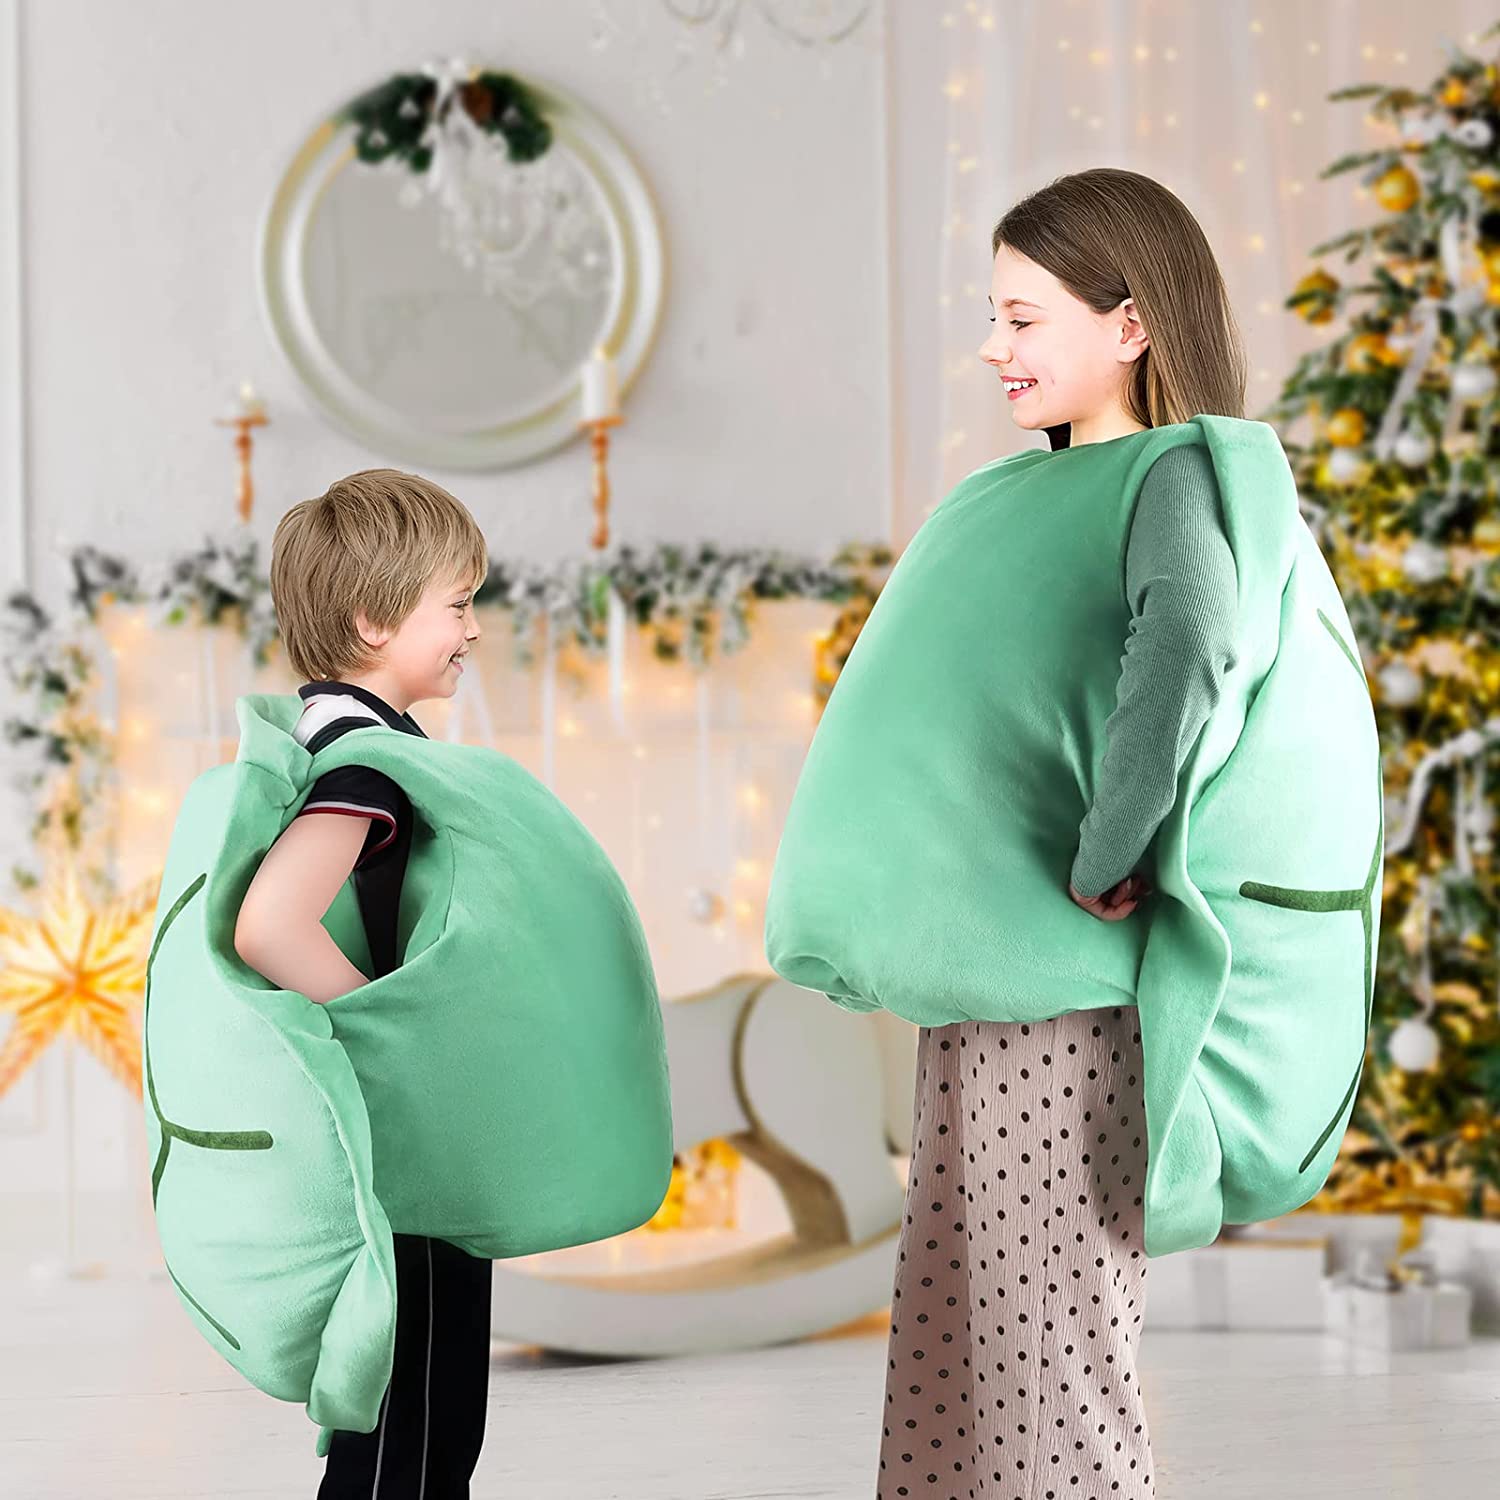 SEAHOME Wearable Turtle Shell Pillows，Turtle Plush Pillow Stuffed Animal  Costume for Kids Adults ， Plush Toy Funny Dress Up Creative Gifts (Green,  51